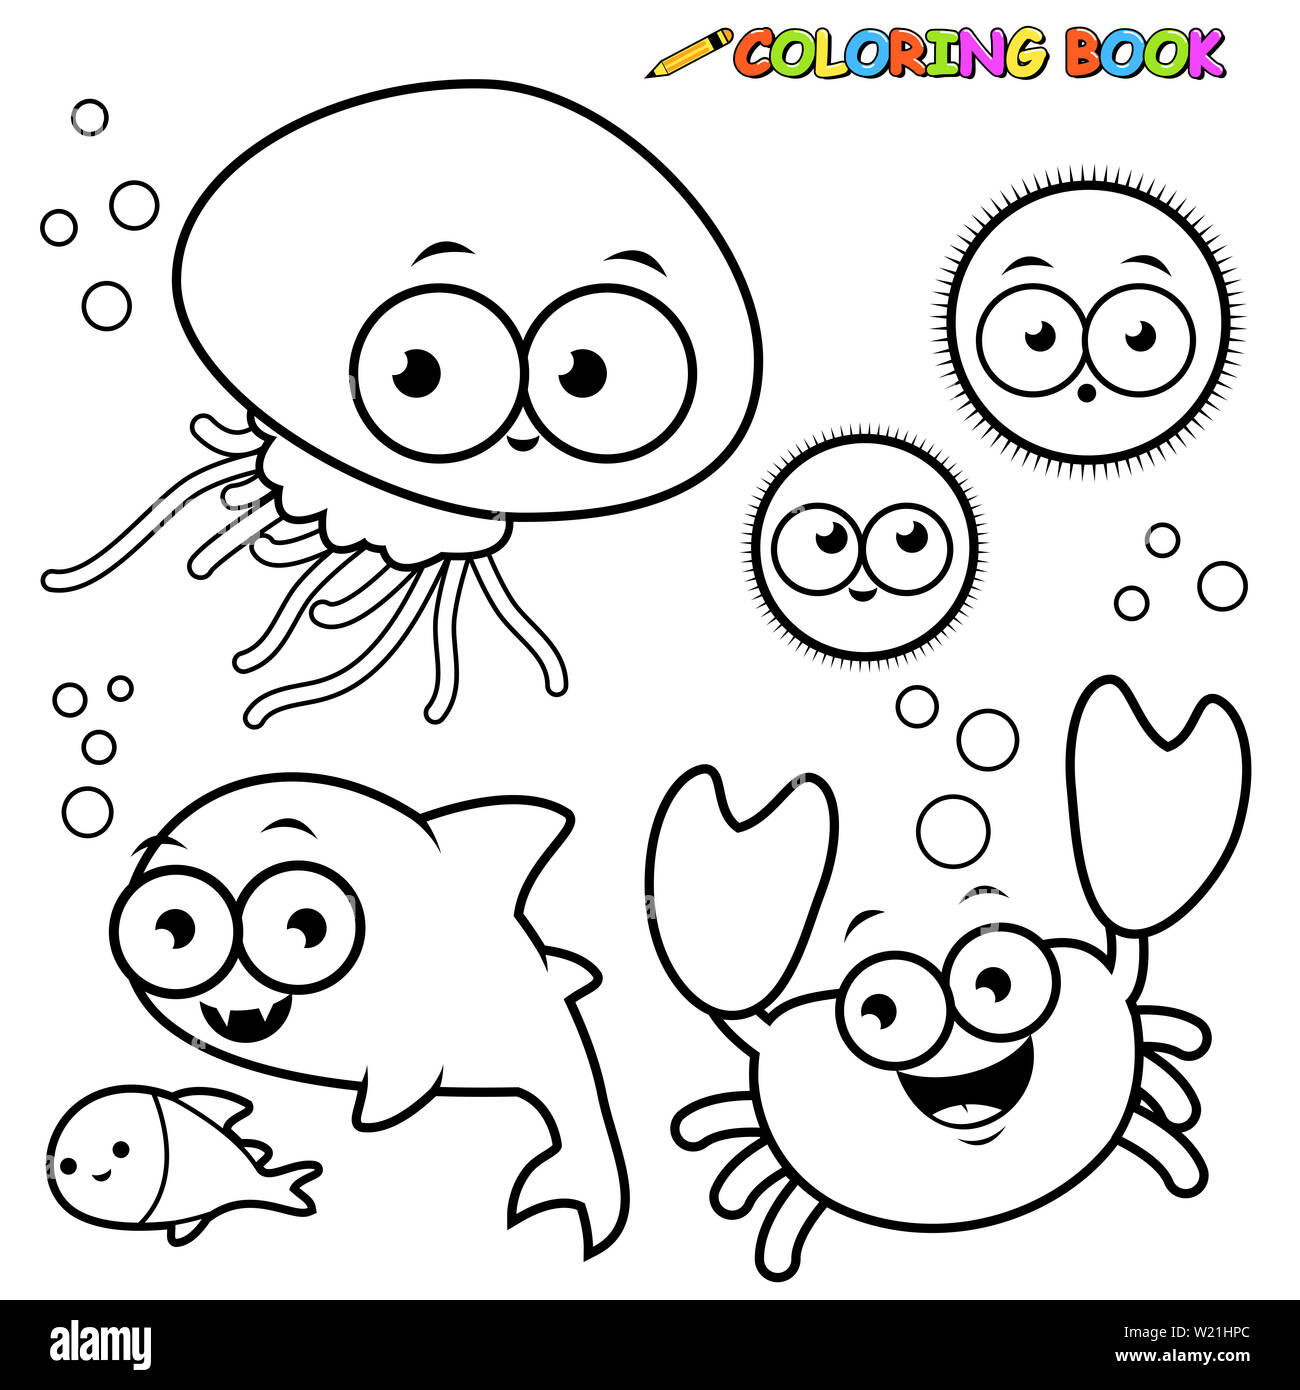 Black and white outline illustrations of sea animals. Coloring book page. Stock Photo